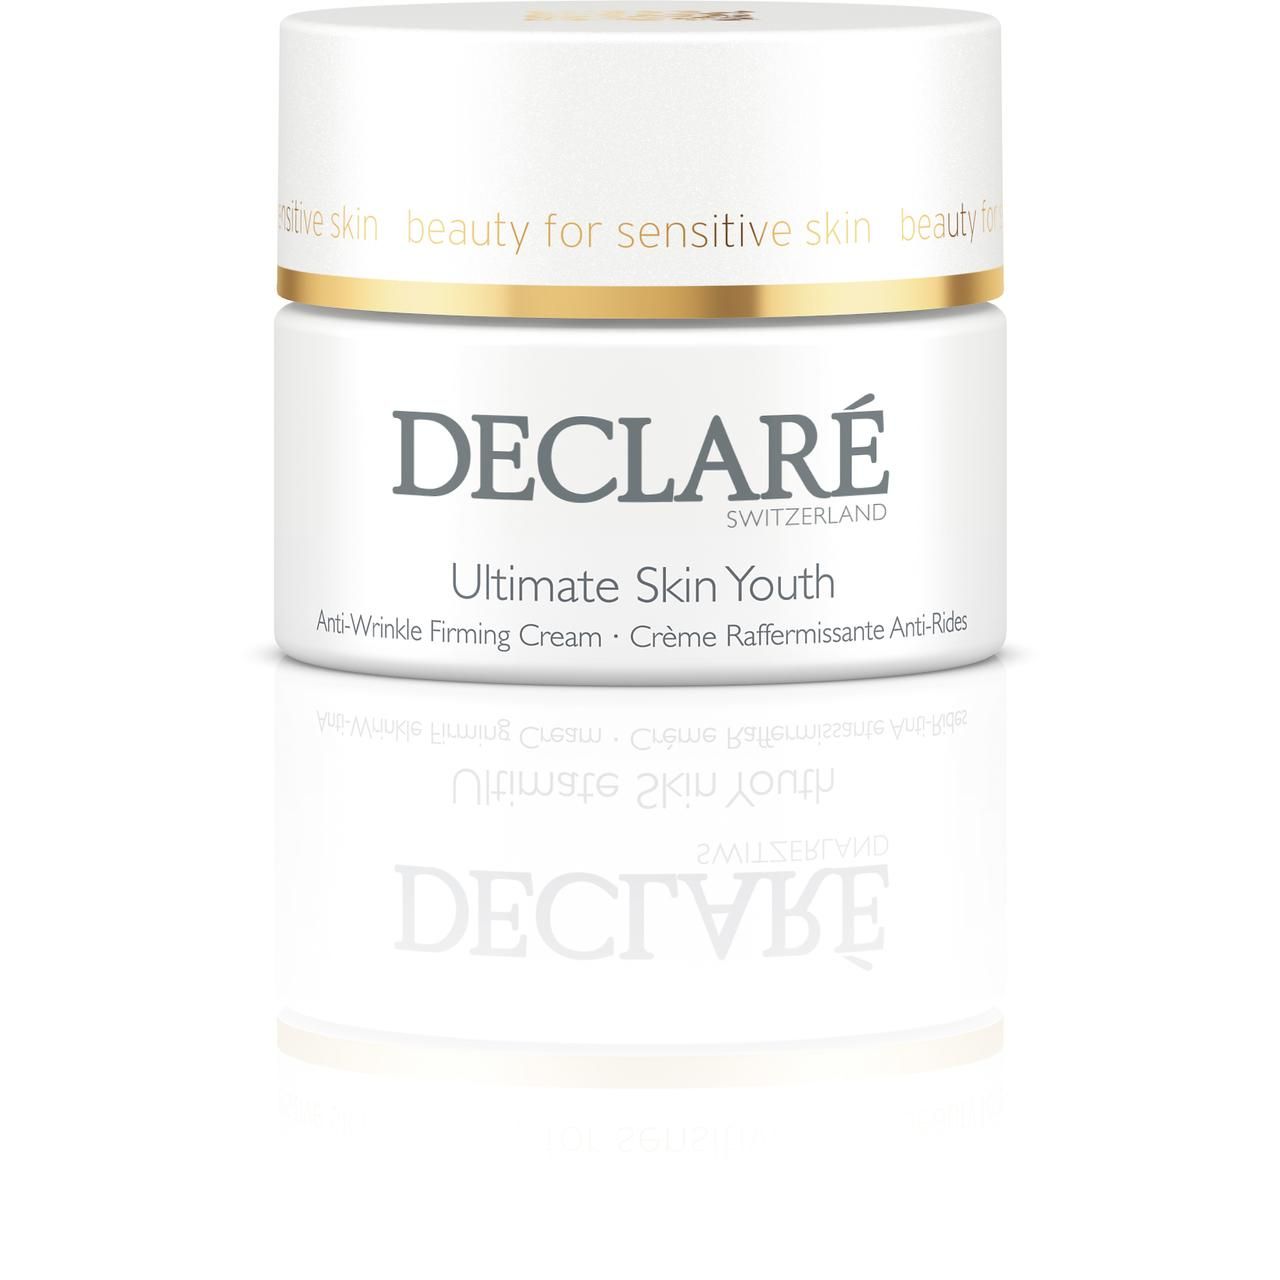 Declare Ultimate Skin Youth Anti-Wrinkle Firming Cream